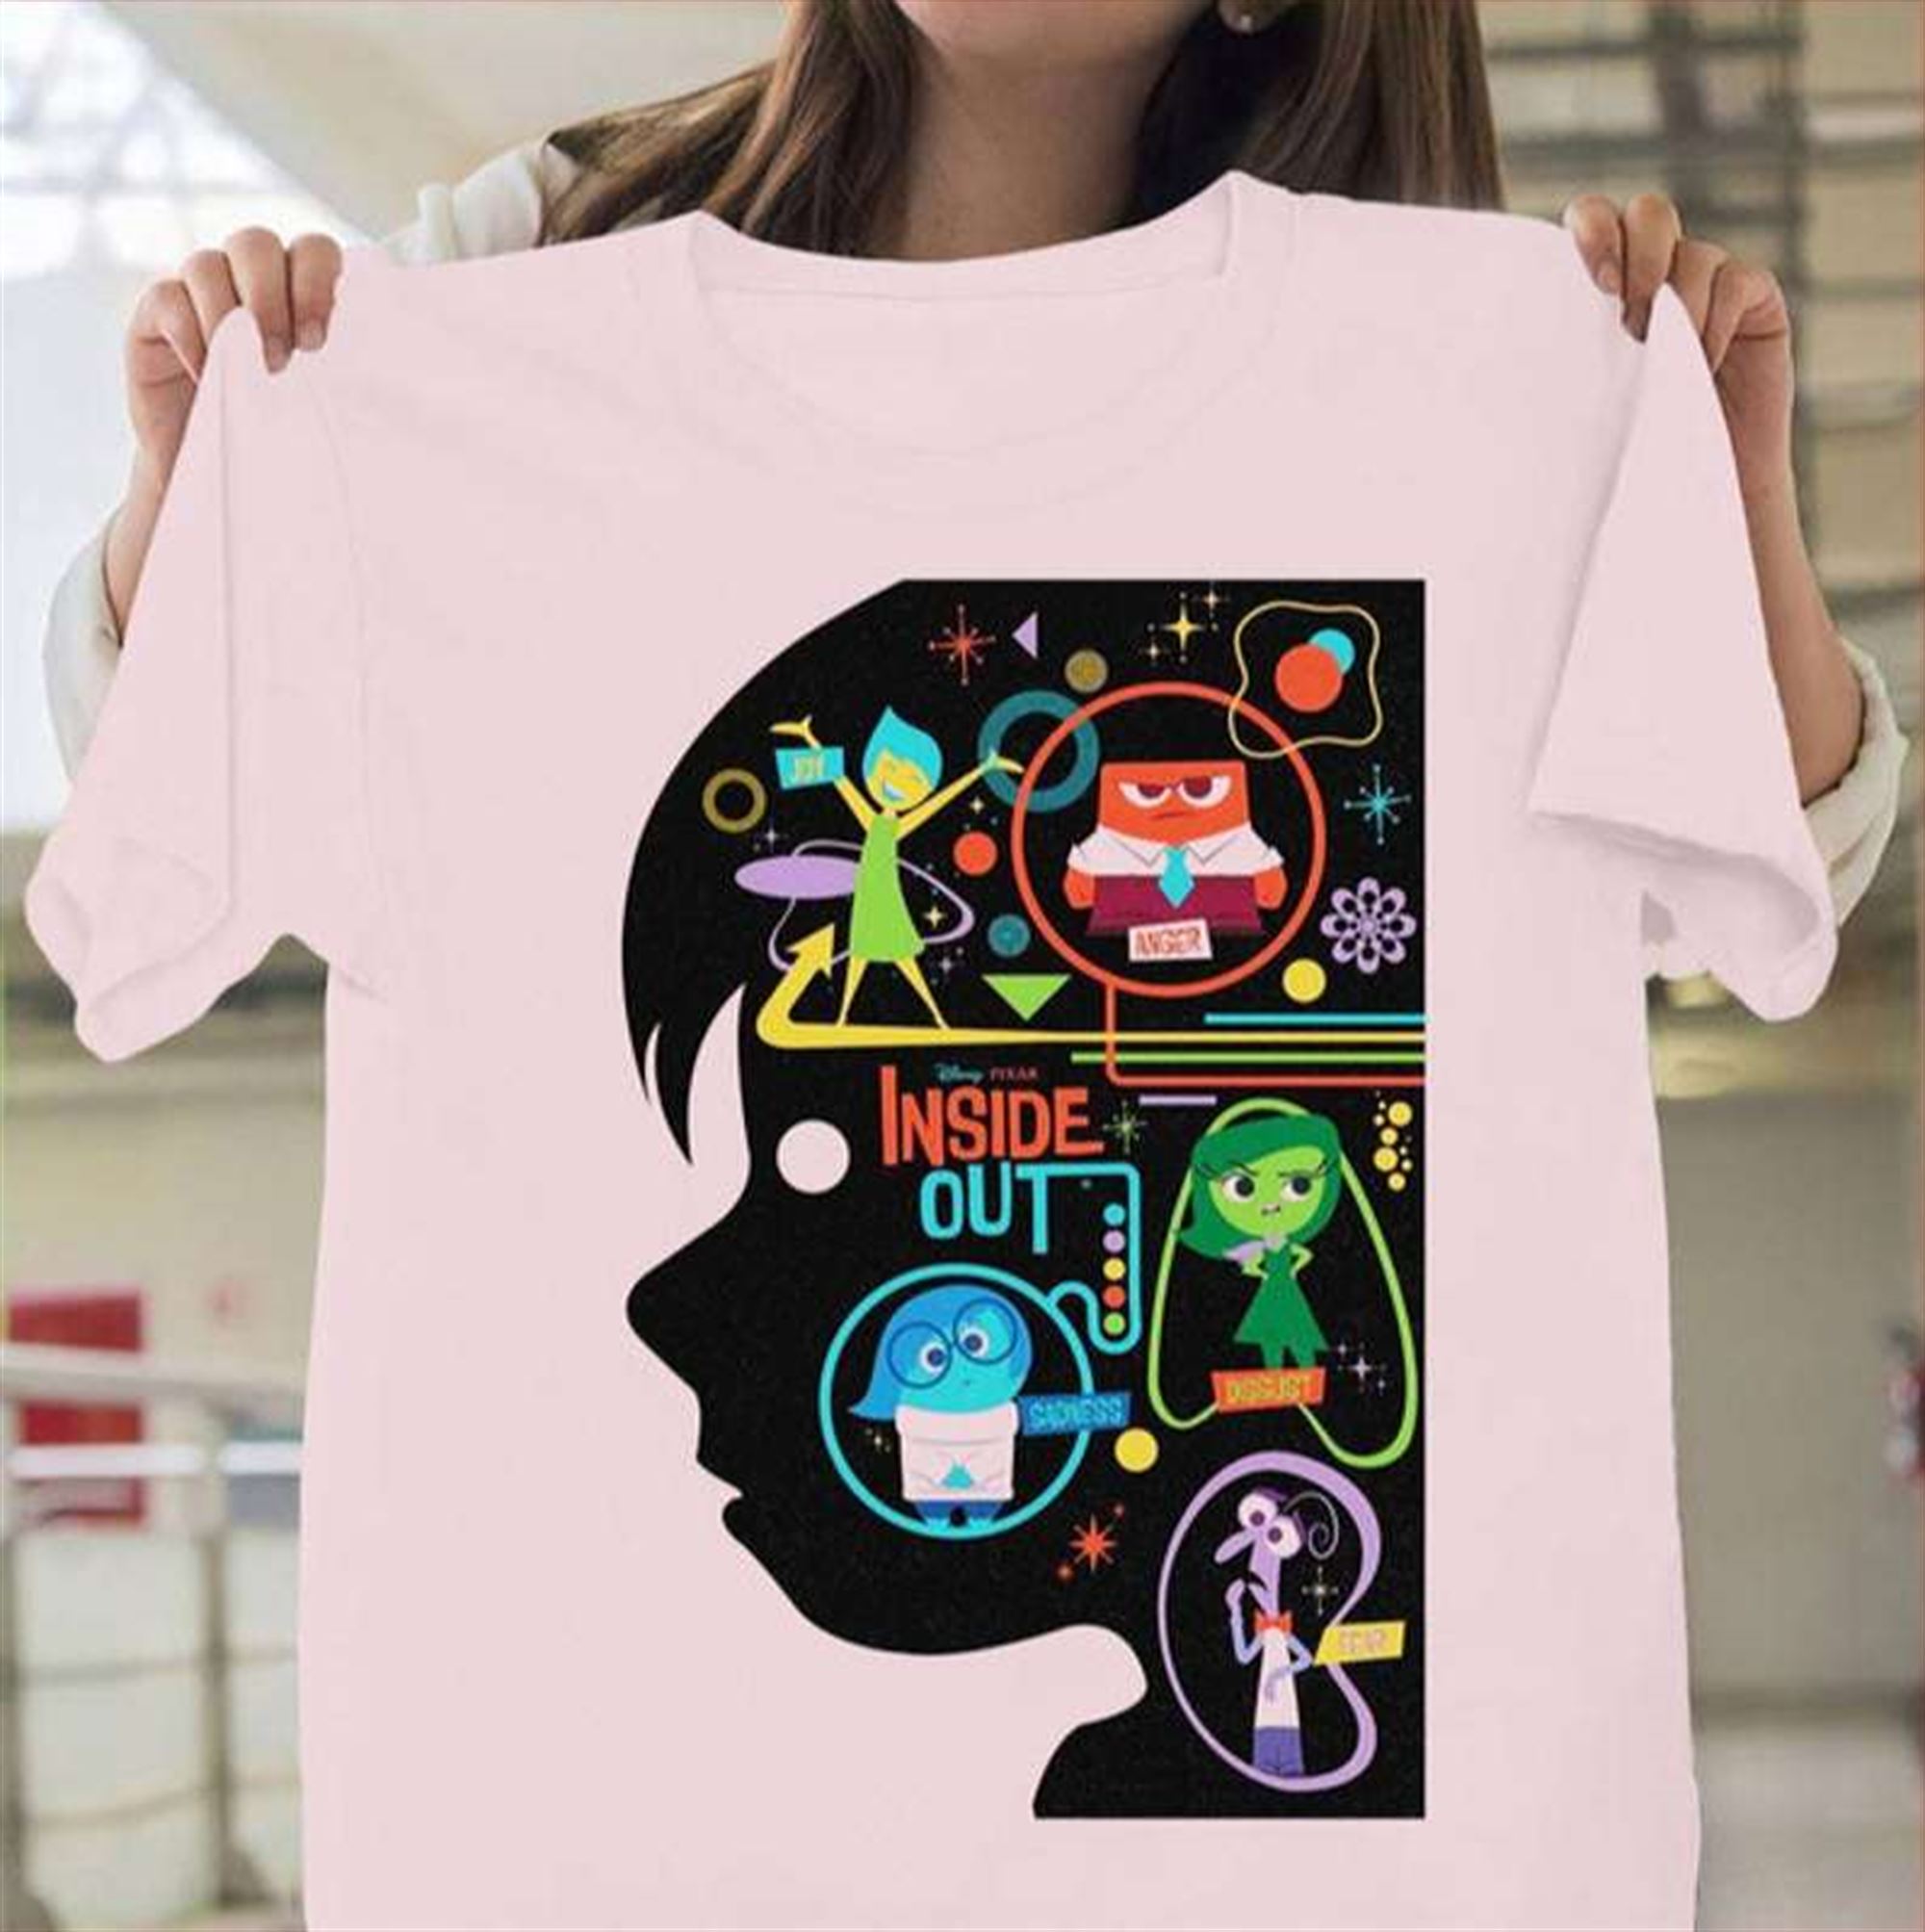 Disney Pixar Inside Out Complicated T Shirt Size Up To 5xl